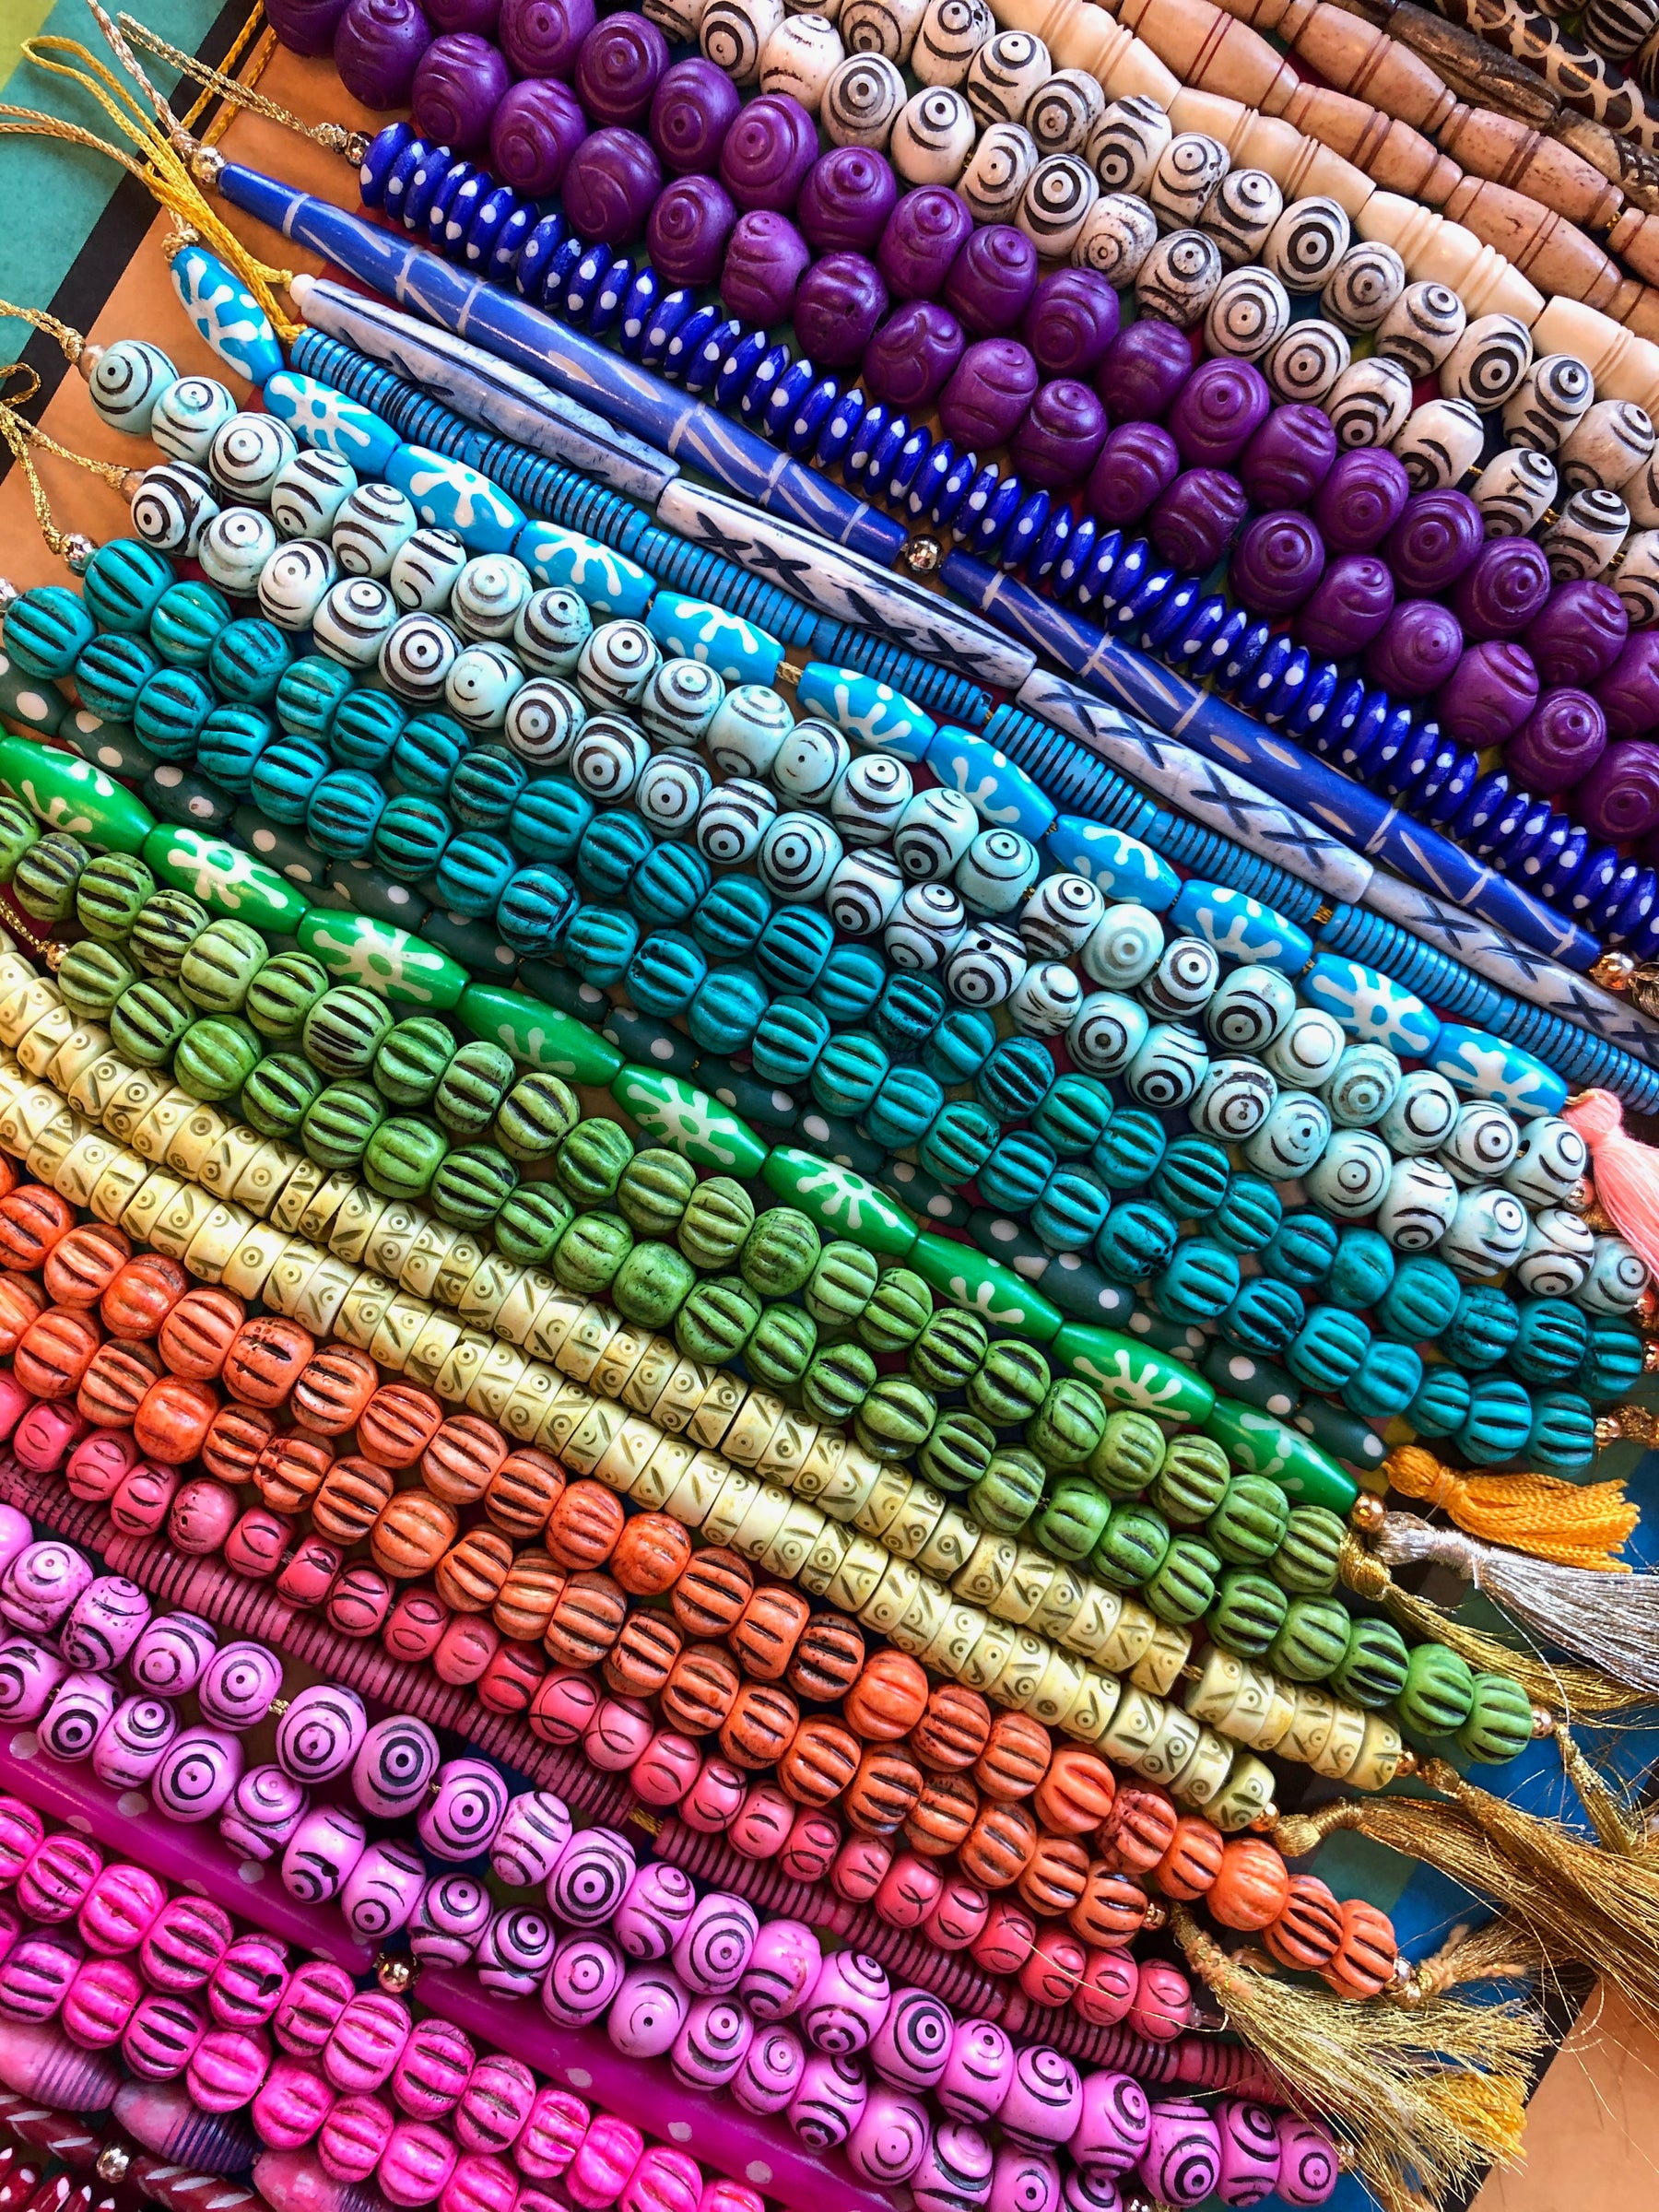 Artisan made handcrafted, handcarved bone beads. Rondelles, Heishi beads, skull beads, hairpipes, in 6mm, 8mm, 10mm, and many more assorted colors and sizes. We work directly with the artisans to offer you these ethically sourced beads.